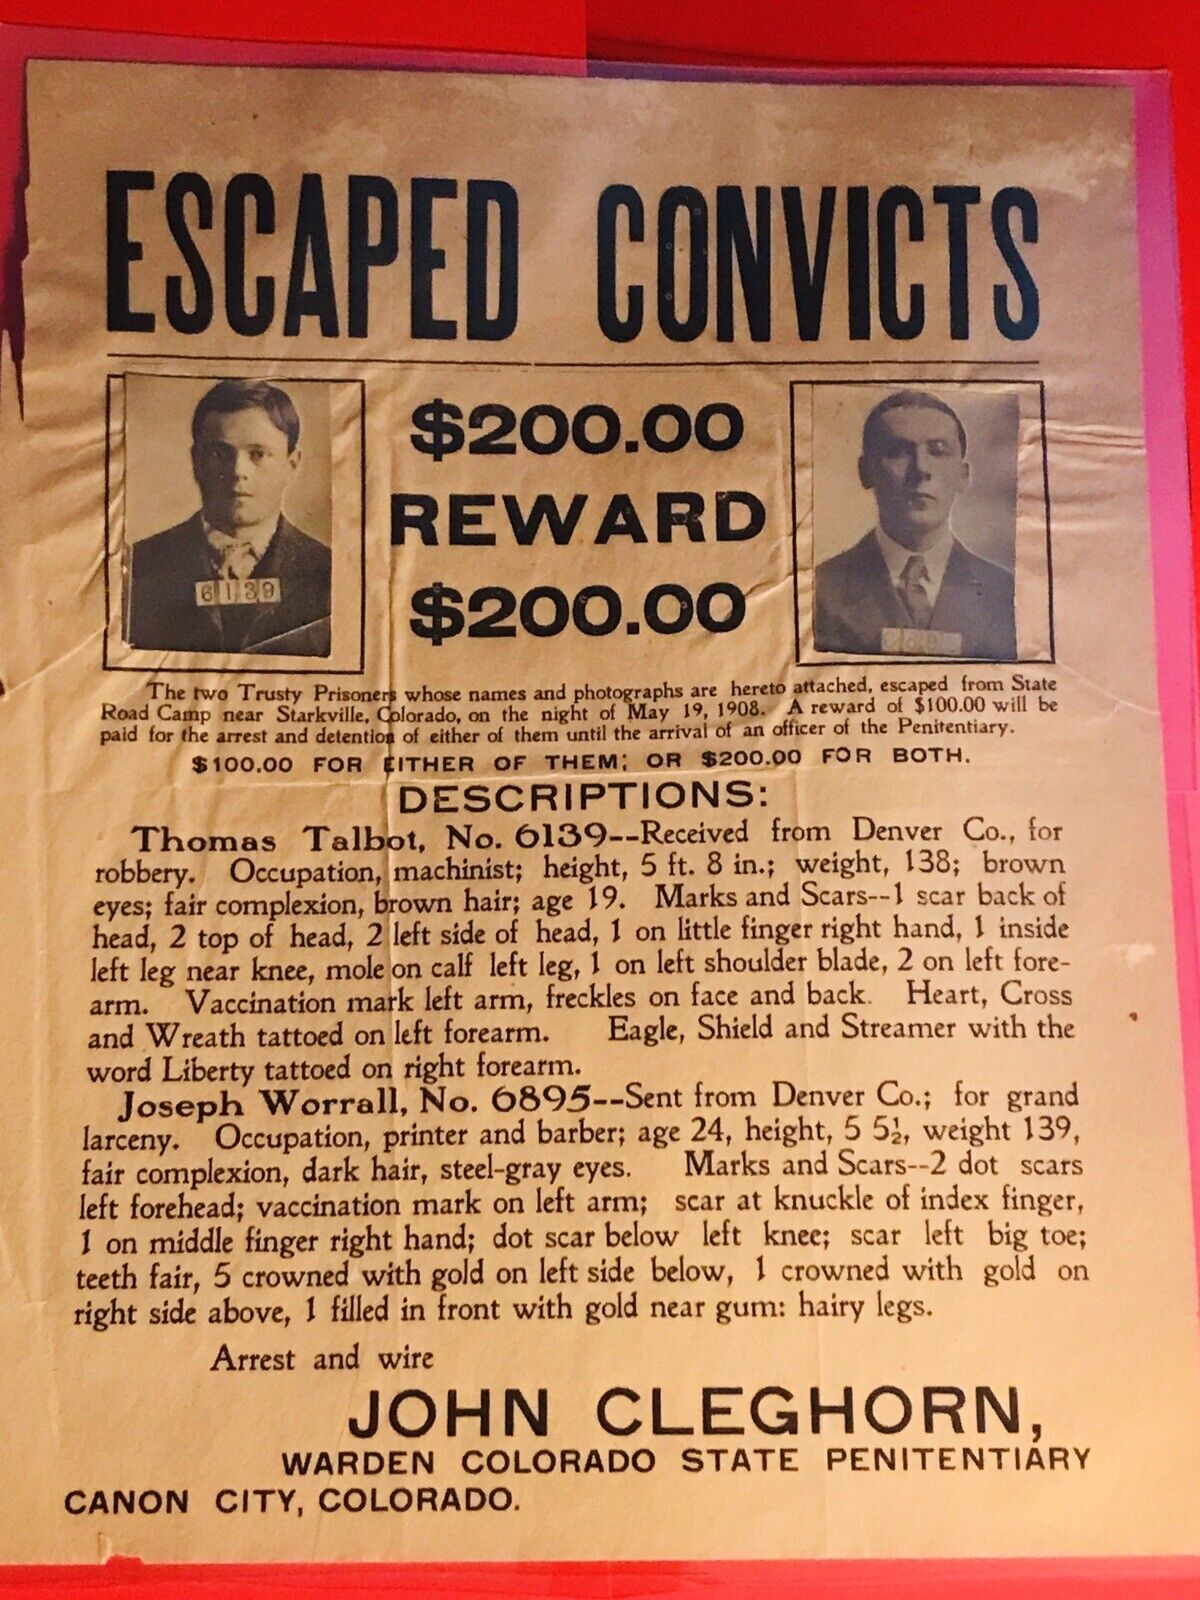 Vintage wanted poster ￼Escape Convict  1908 Starksville Colorado Not A Reprint)￼